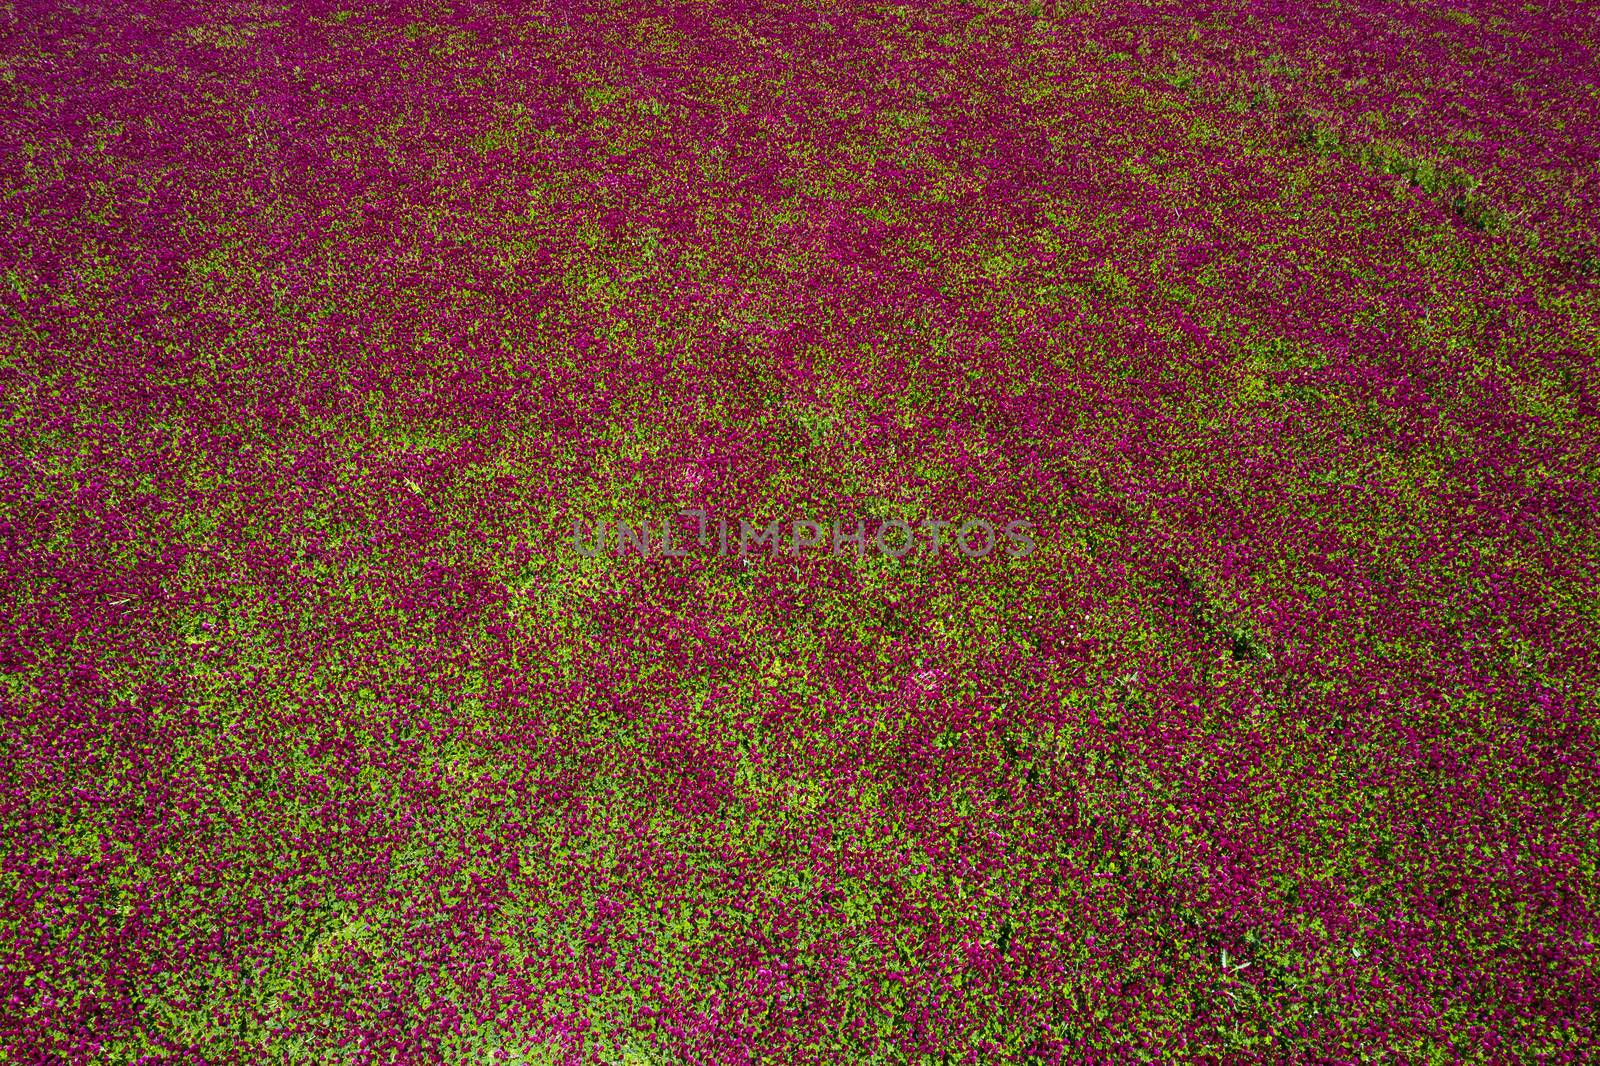 Crimson clover field from above by fyletto